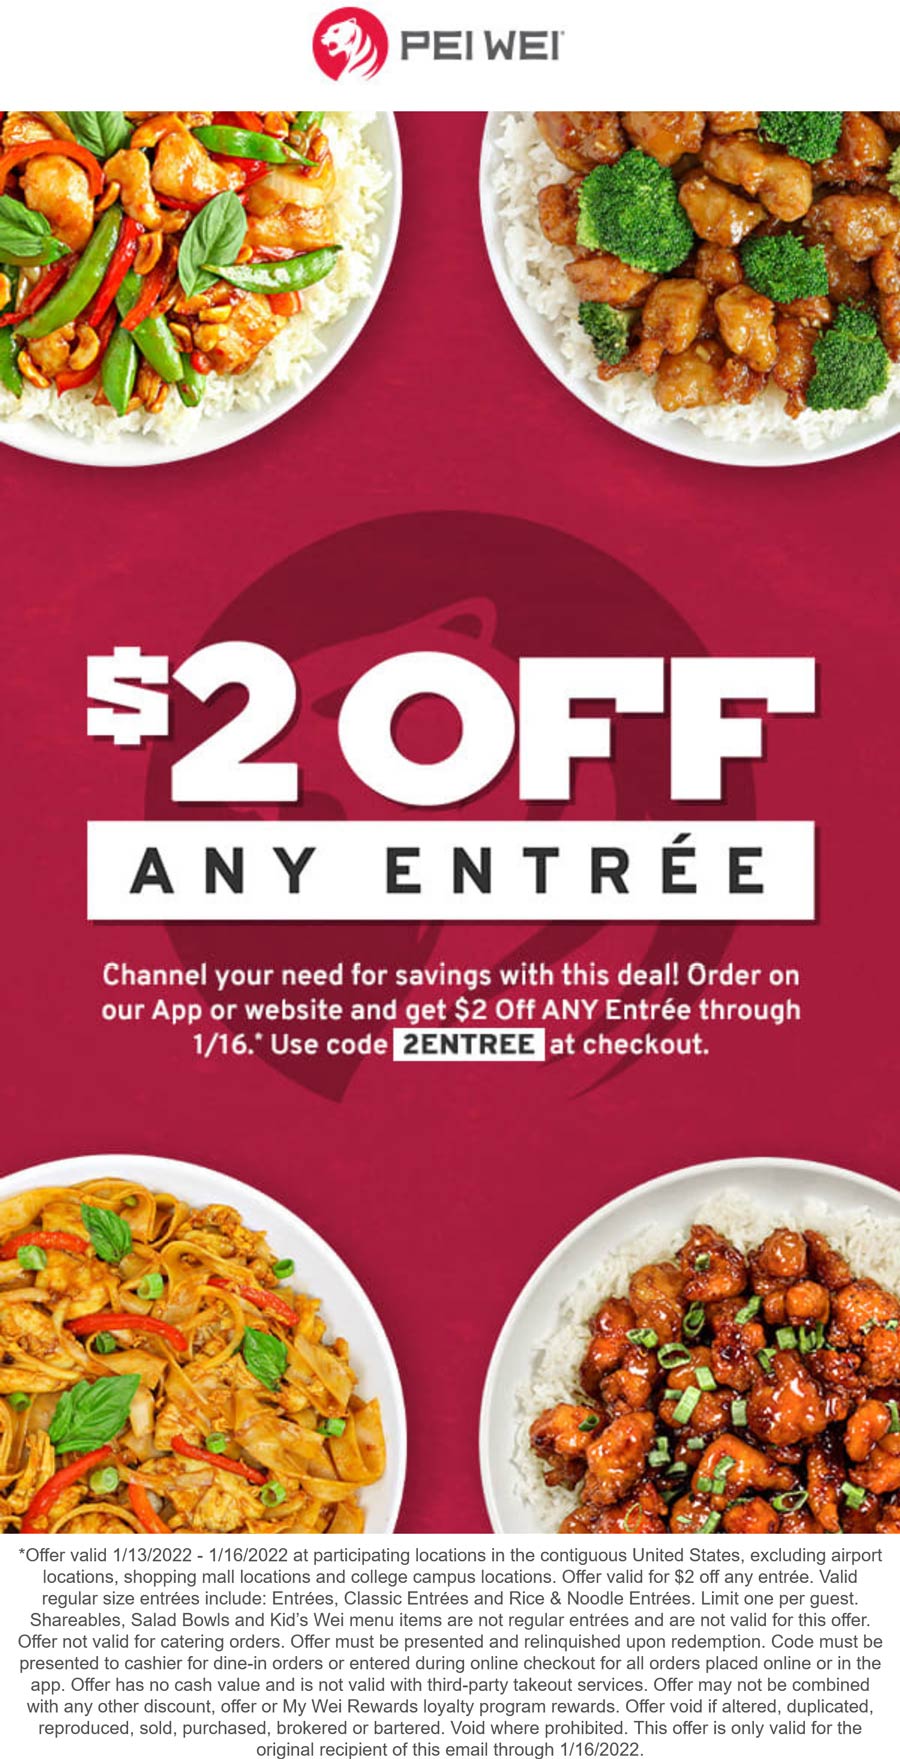 Pei Wei coupons & promo code for [January 2022]